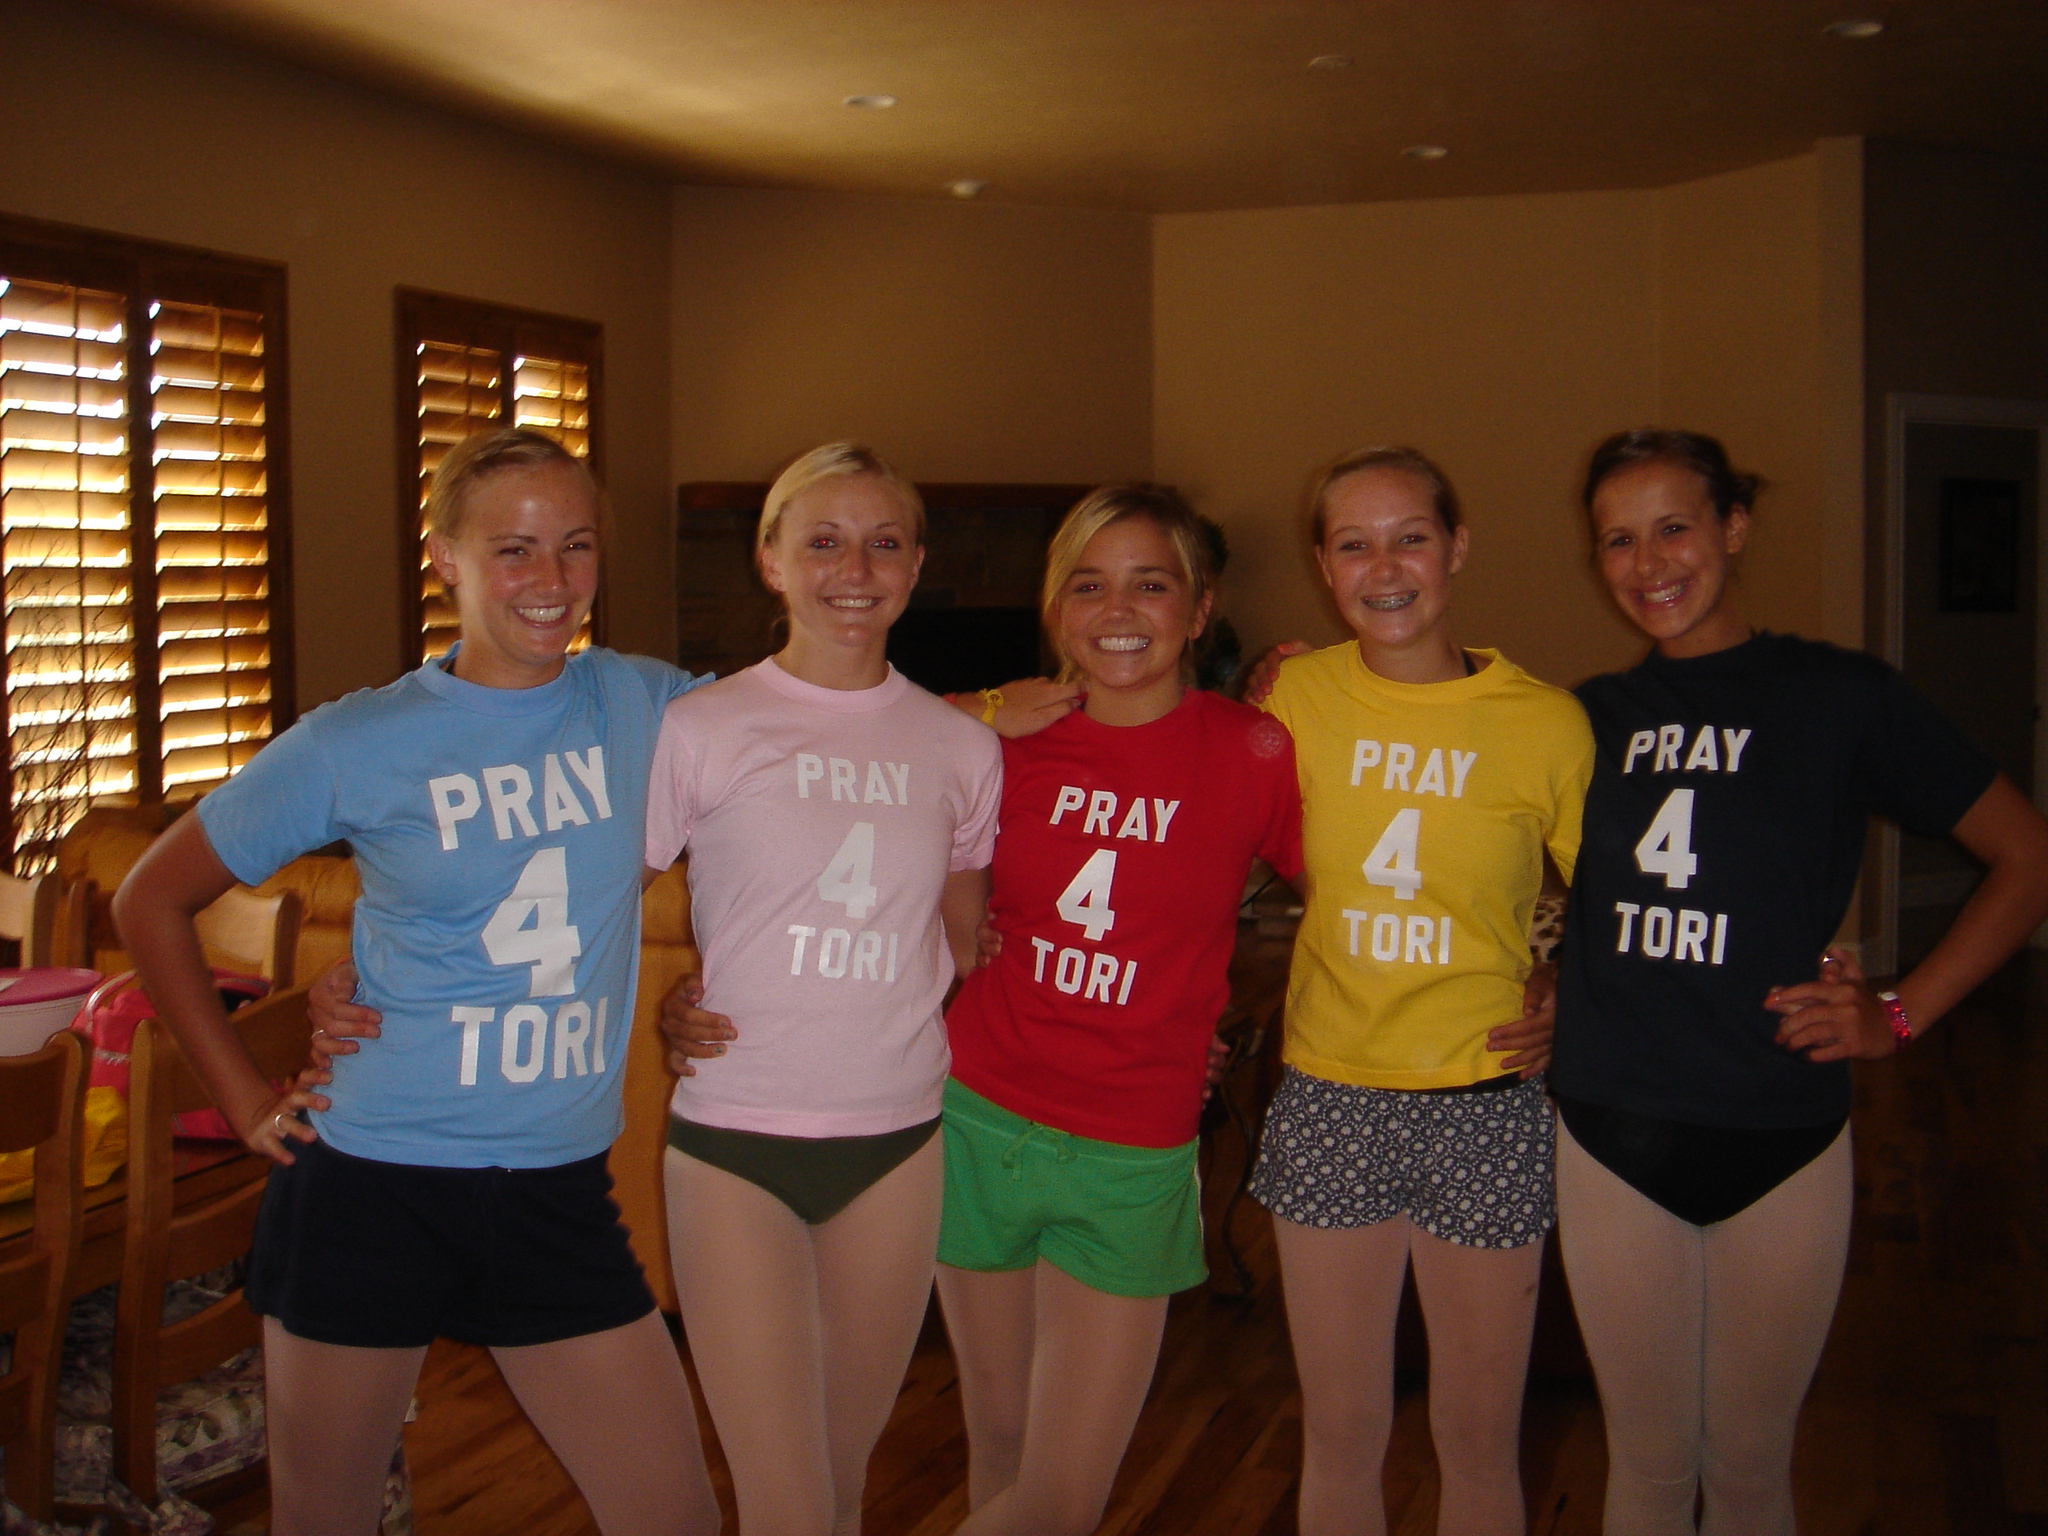 Dance Club friends showing off their P4T shirts